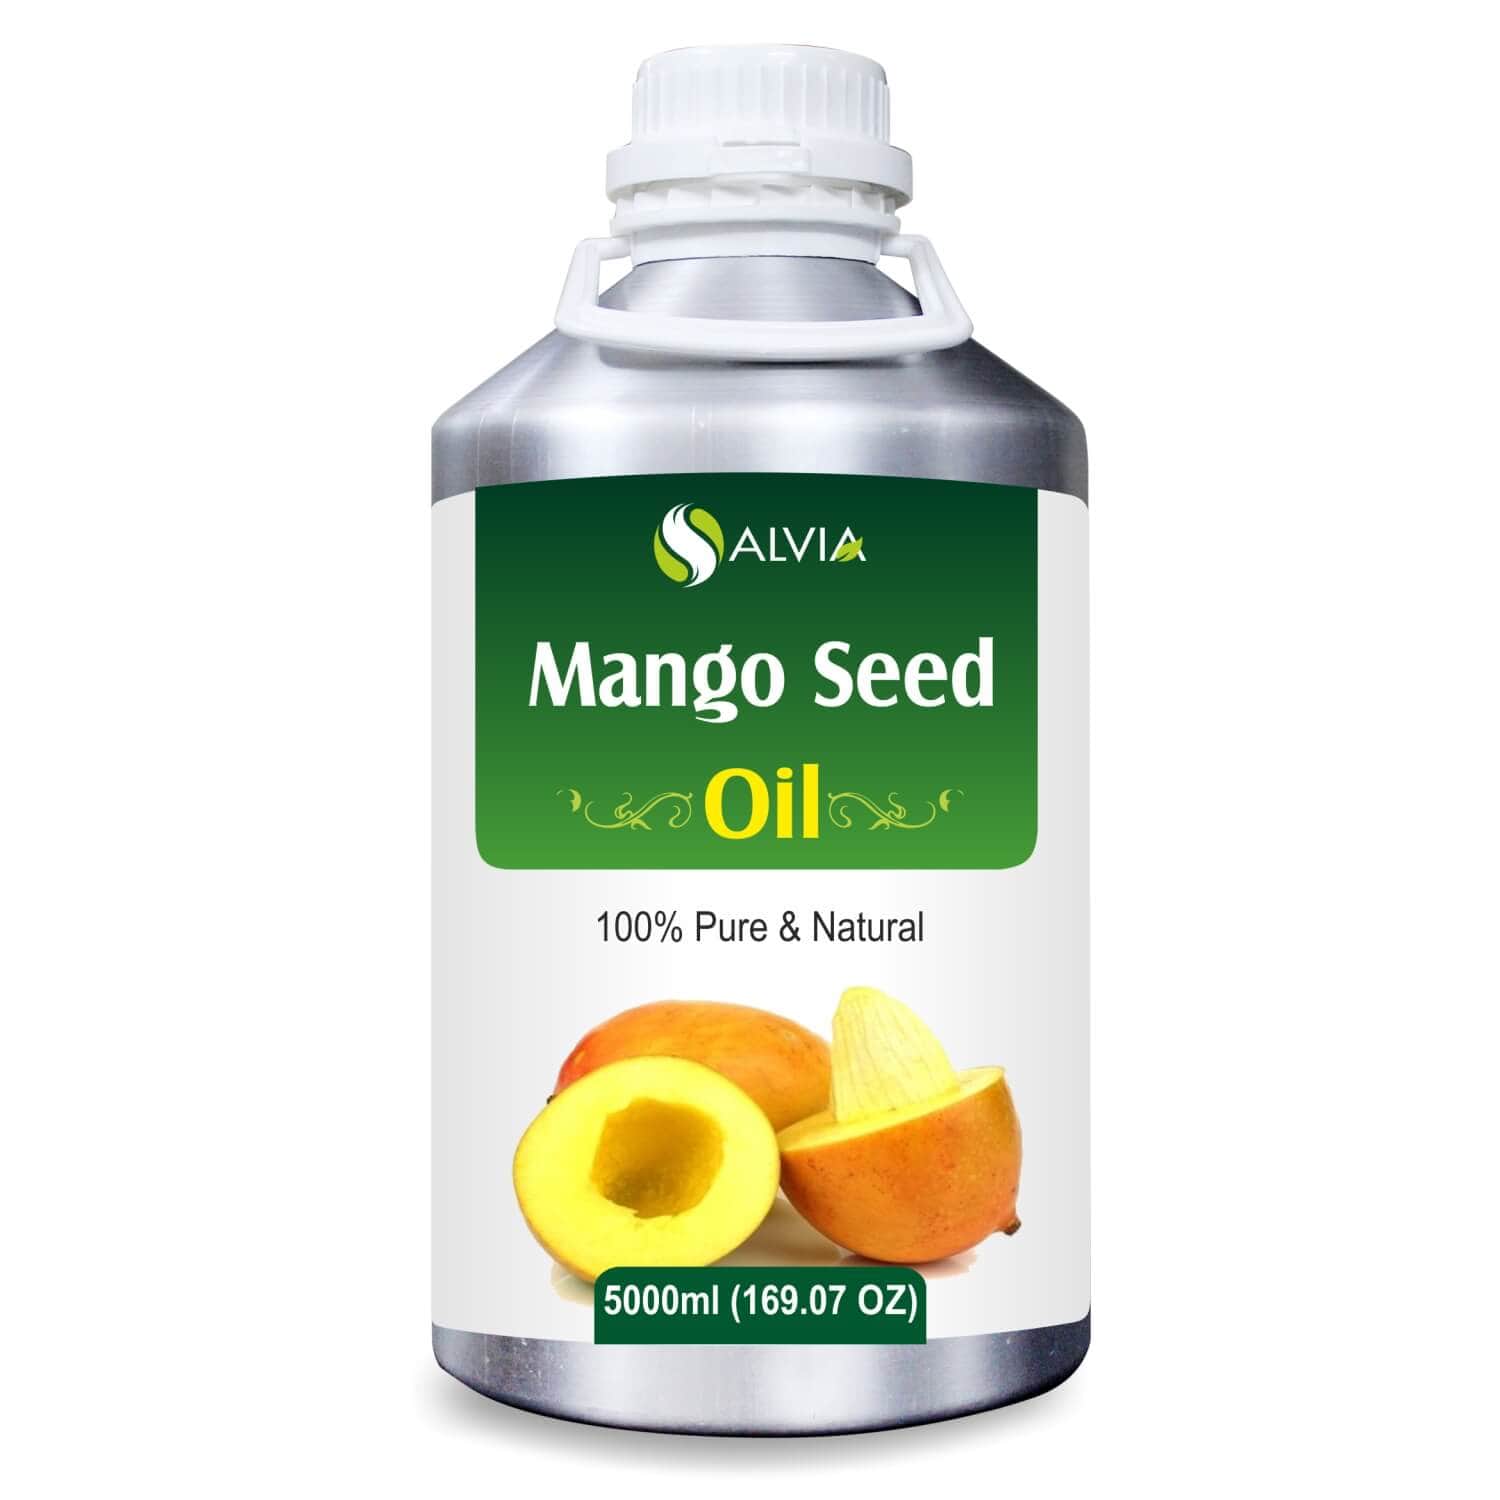 Salvia Natural Carrier Oils 5000ml Mango Seed Oil (Mangifera Indica) 100% Natural Pure Carrier Oil Nourishes & Moisturizes Skin, Soothes Irritated Skin, Nourishes Scalp